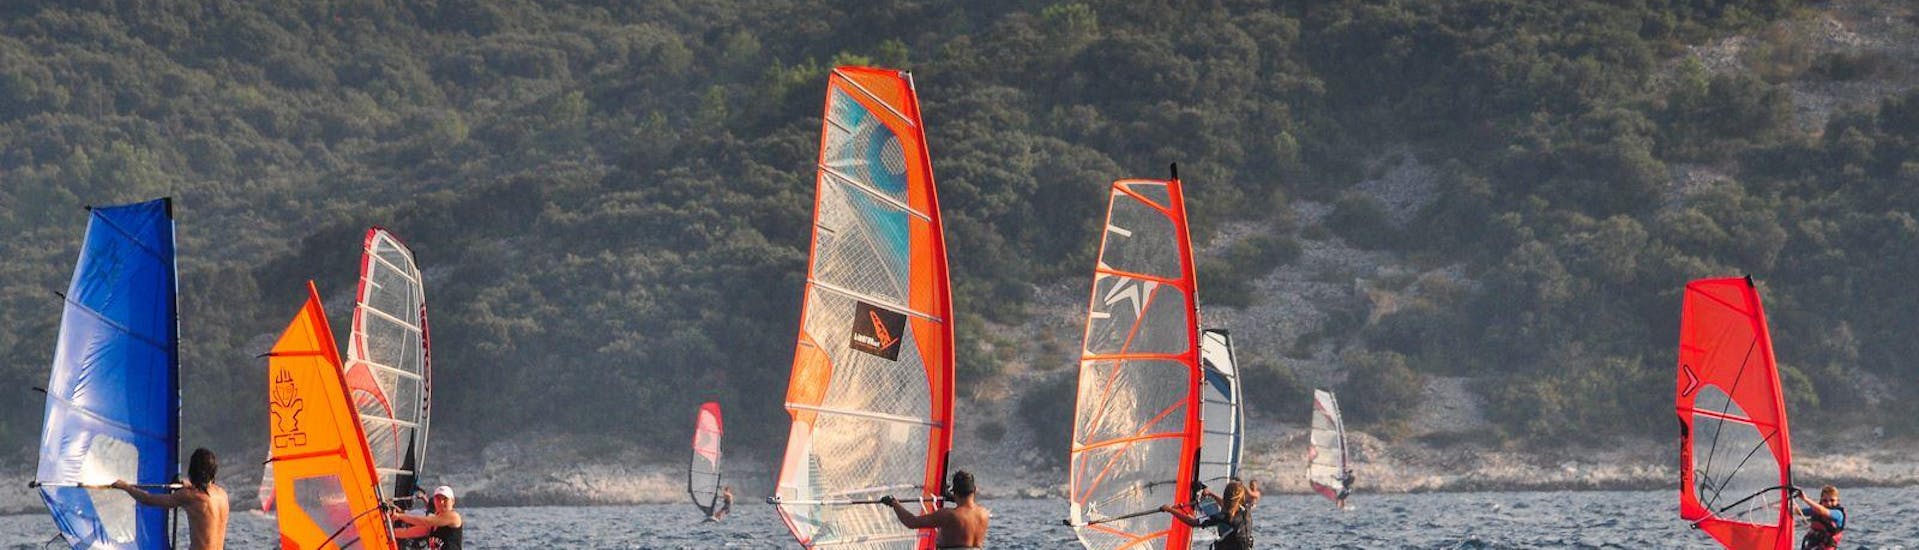 Windsurfing Refresher Course  - Advanced.